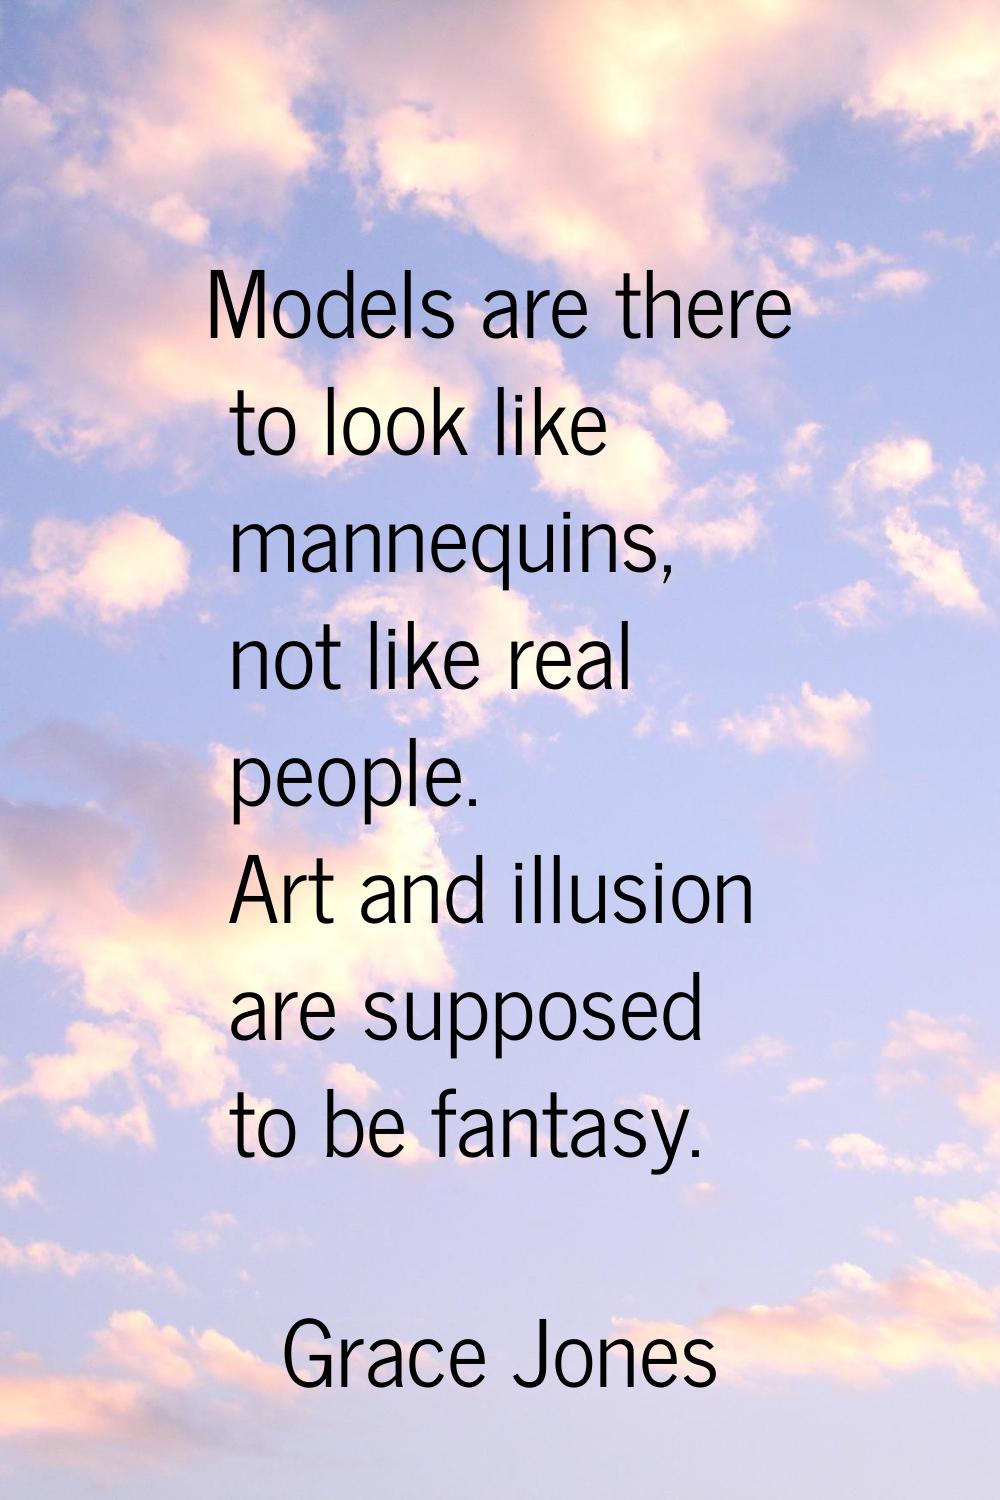 Models are there to look like mannequins, not like real people. Art and illusion are supposed to be